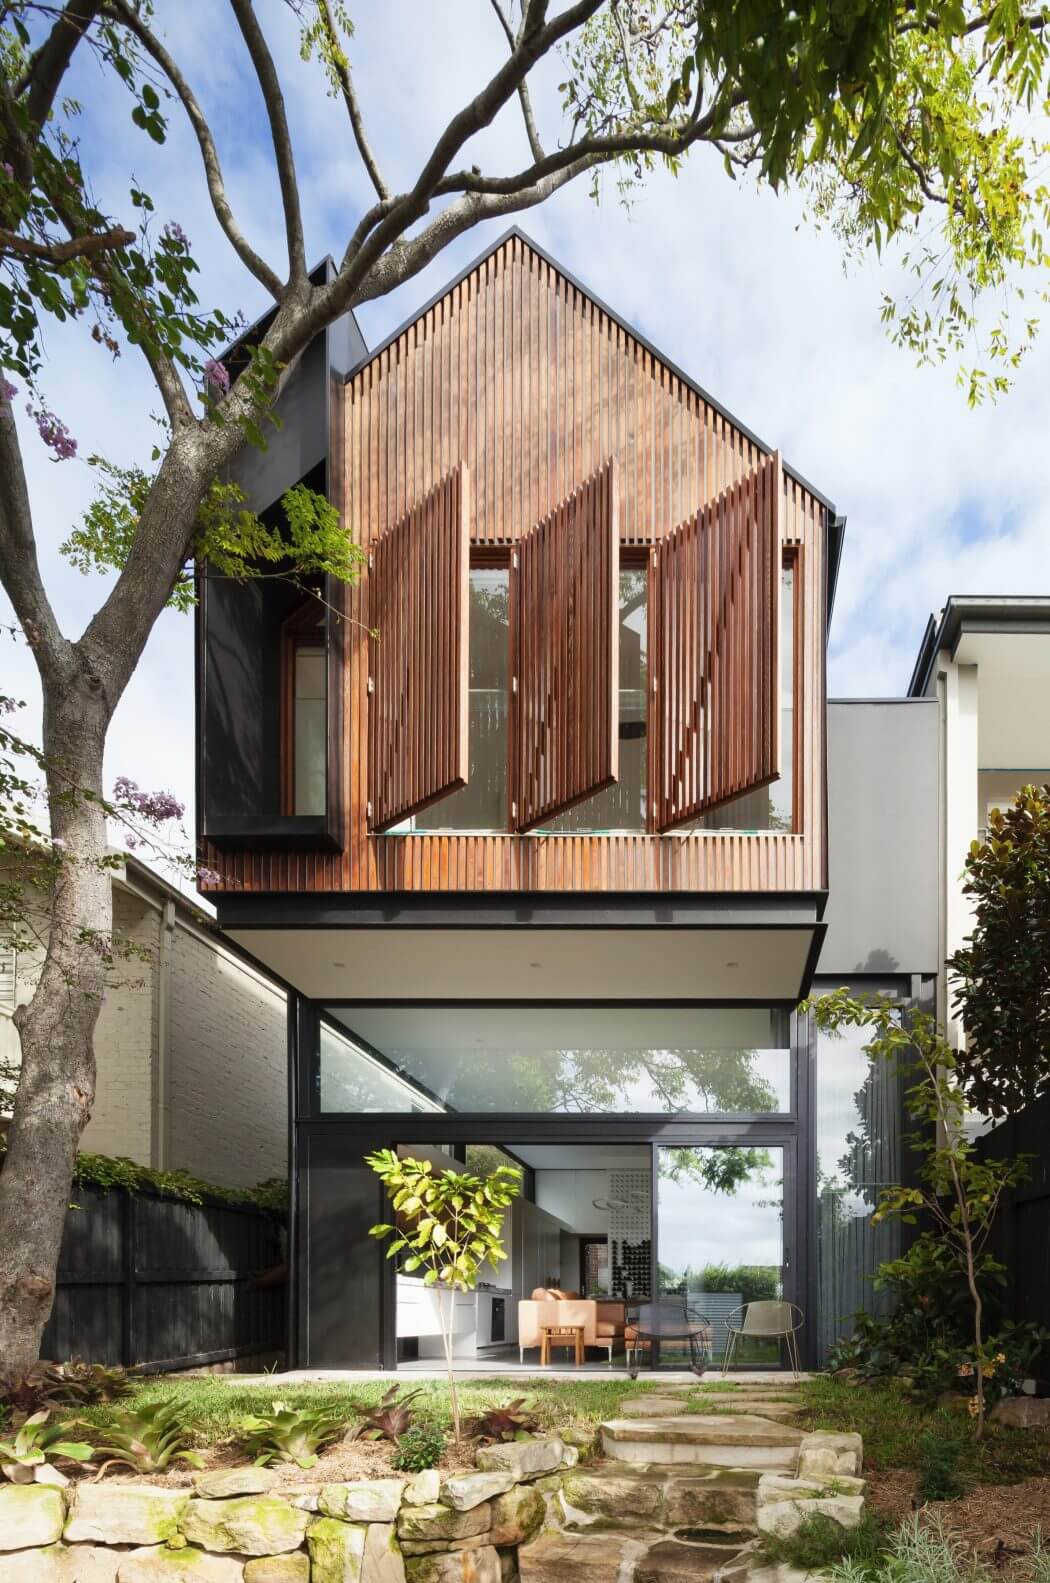 A modern wooden structure with a geometric facade and large glass windows overlooking a lush garden.